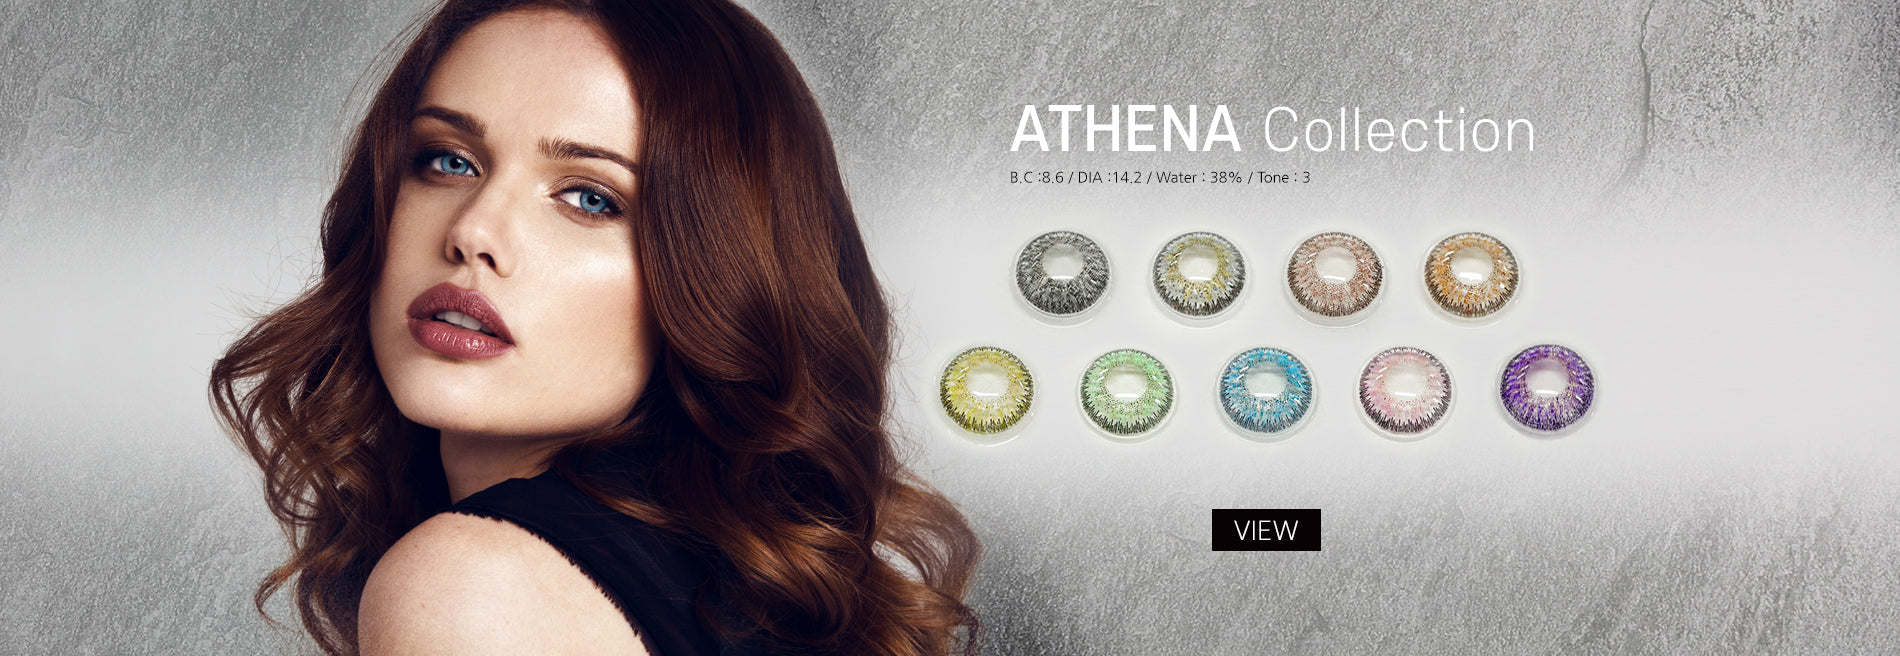 a beautiful woman is wearing athena collection lenses from krazyeyes4u.com